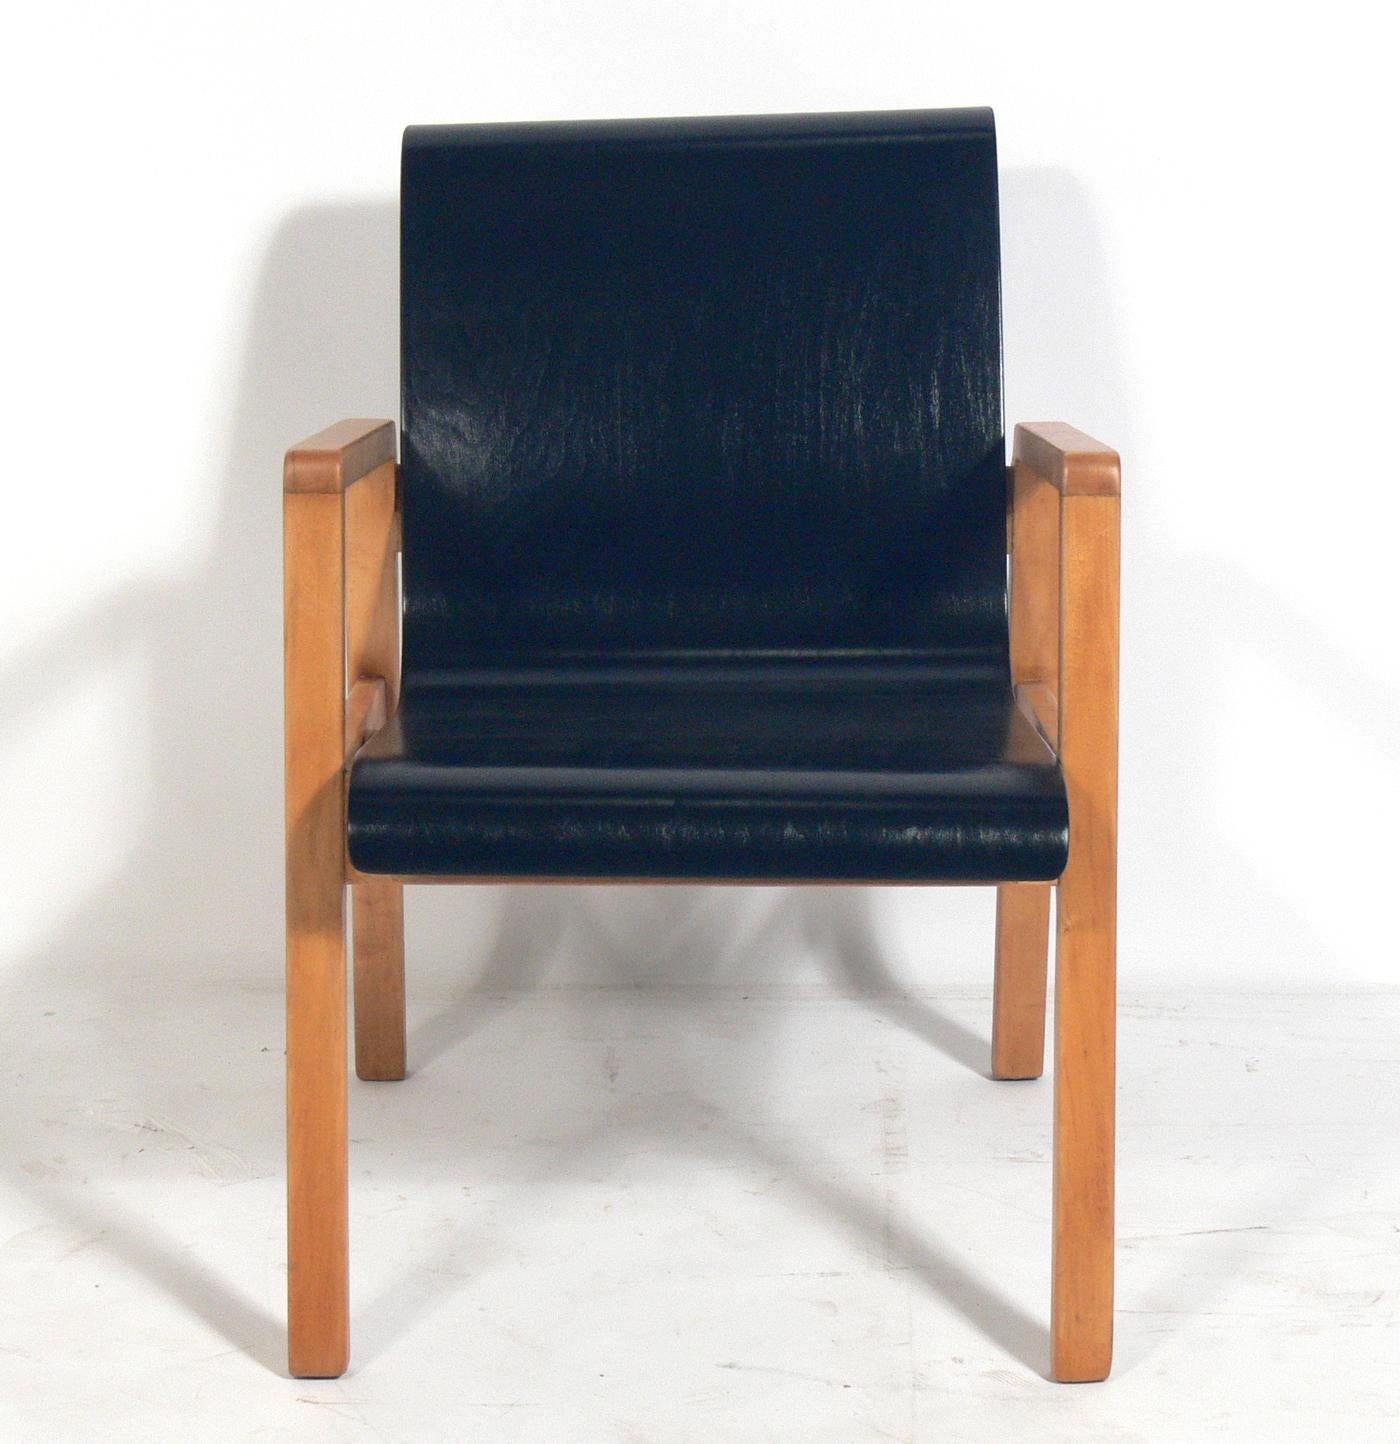 Set of four bentwood modern armchairs, designed by Alvar Aalto, Finland, circa 1940s. They have been refinished and are ready to use. They are a versatile size and can be used as dining chairs, or as lounge or occasional chairs.